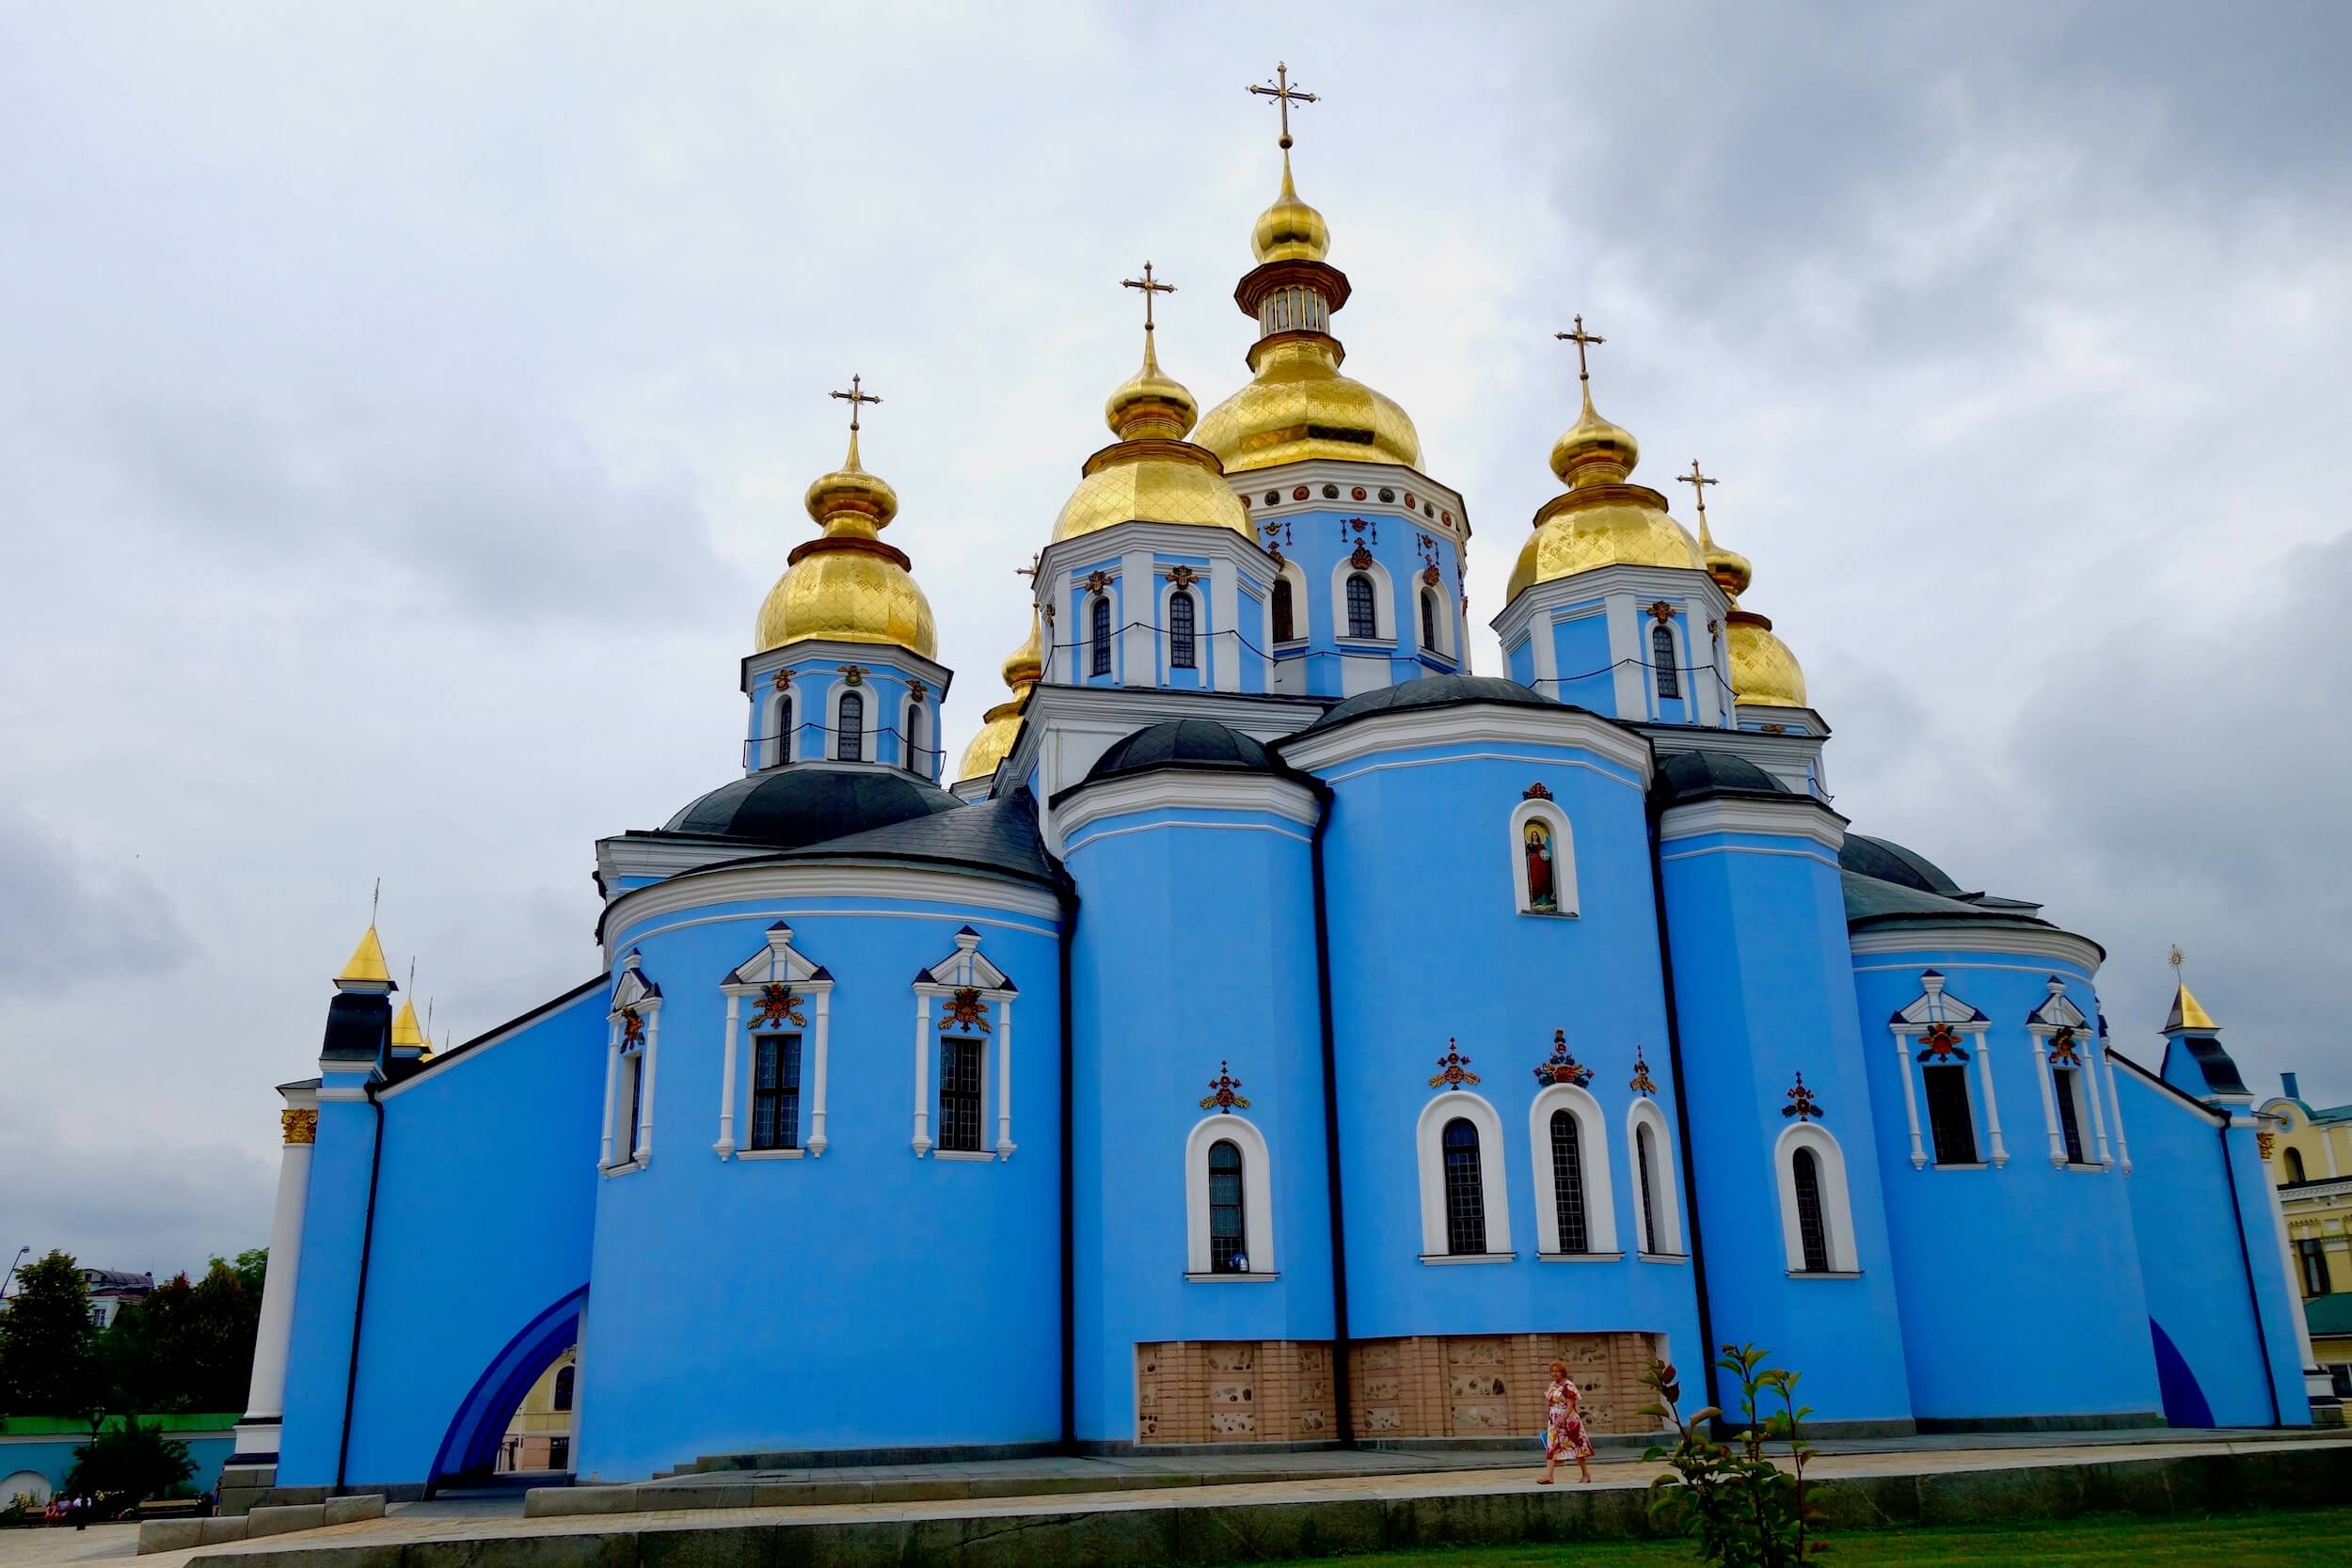 The main church in the complex at St. Michael's Monastery is alive with bright blue walls and shiny golden spires.